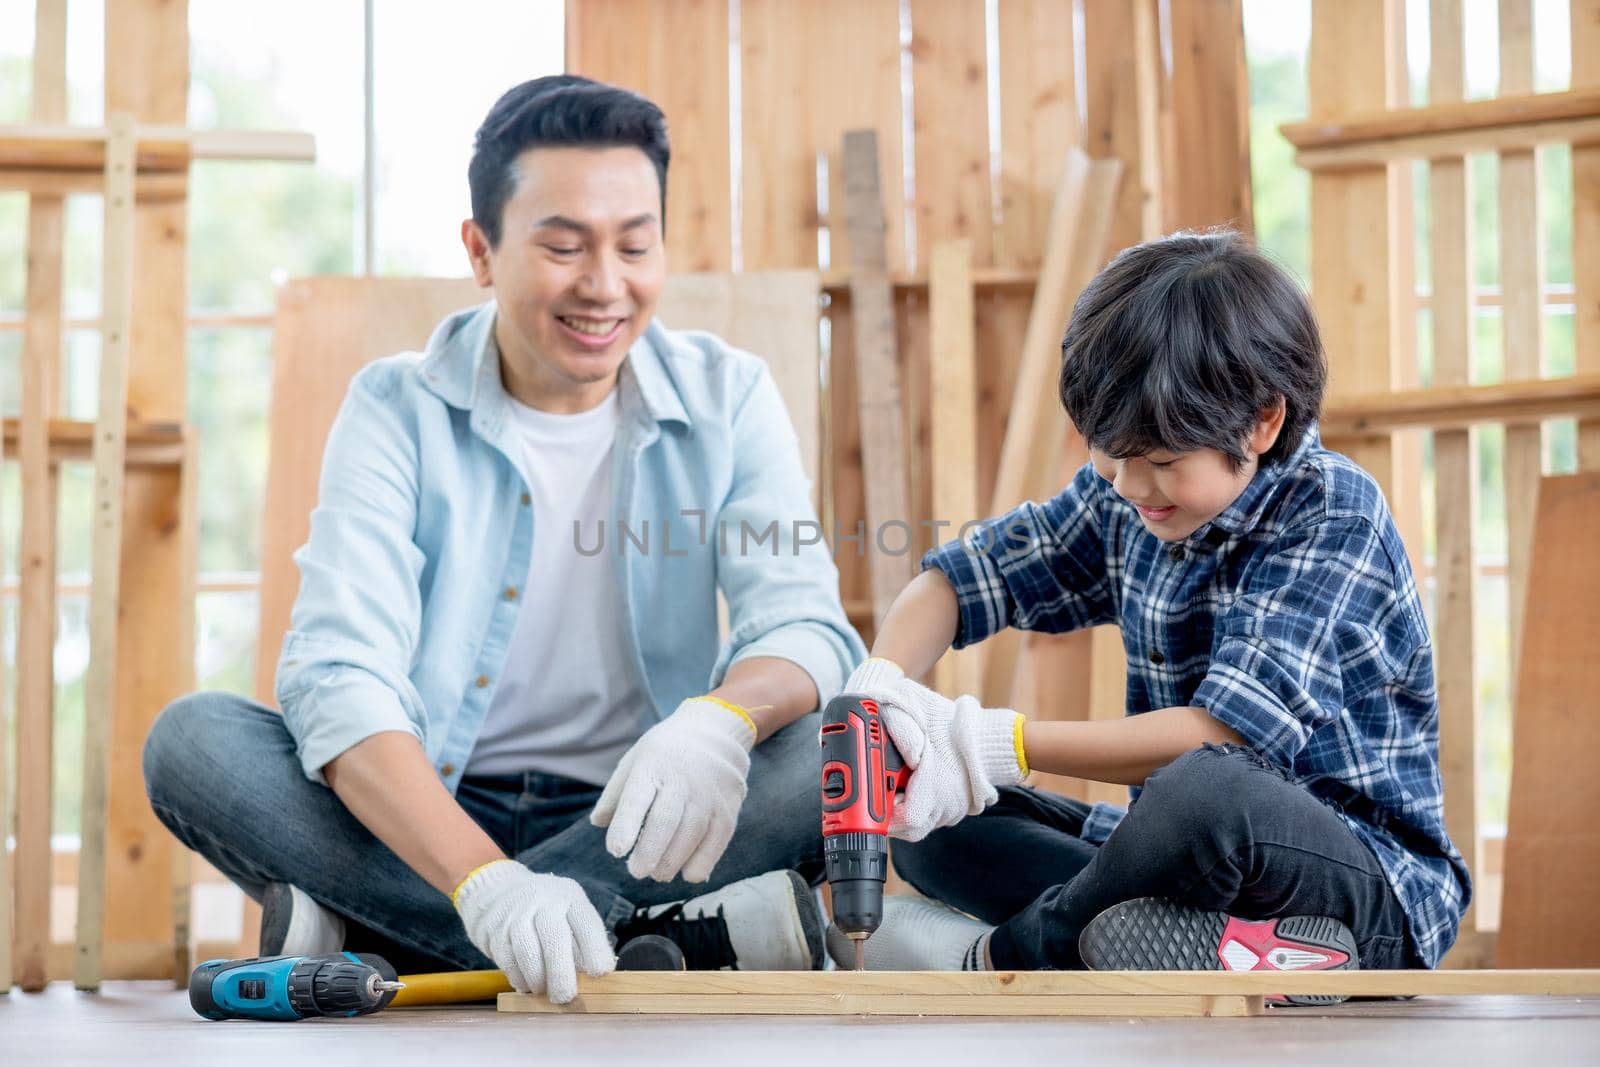 Asian father look carefully son use drill in their workplace of carpentering with happy emotion. Asian family concept to stay at home and enjoy good relationship hobby together.